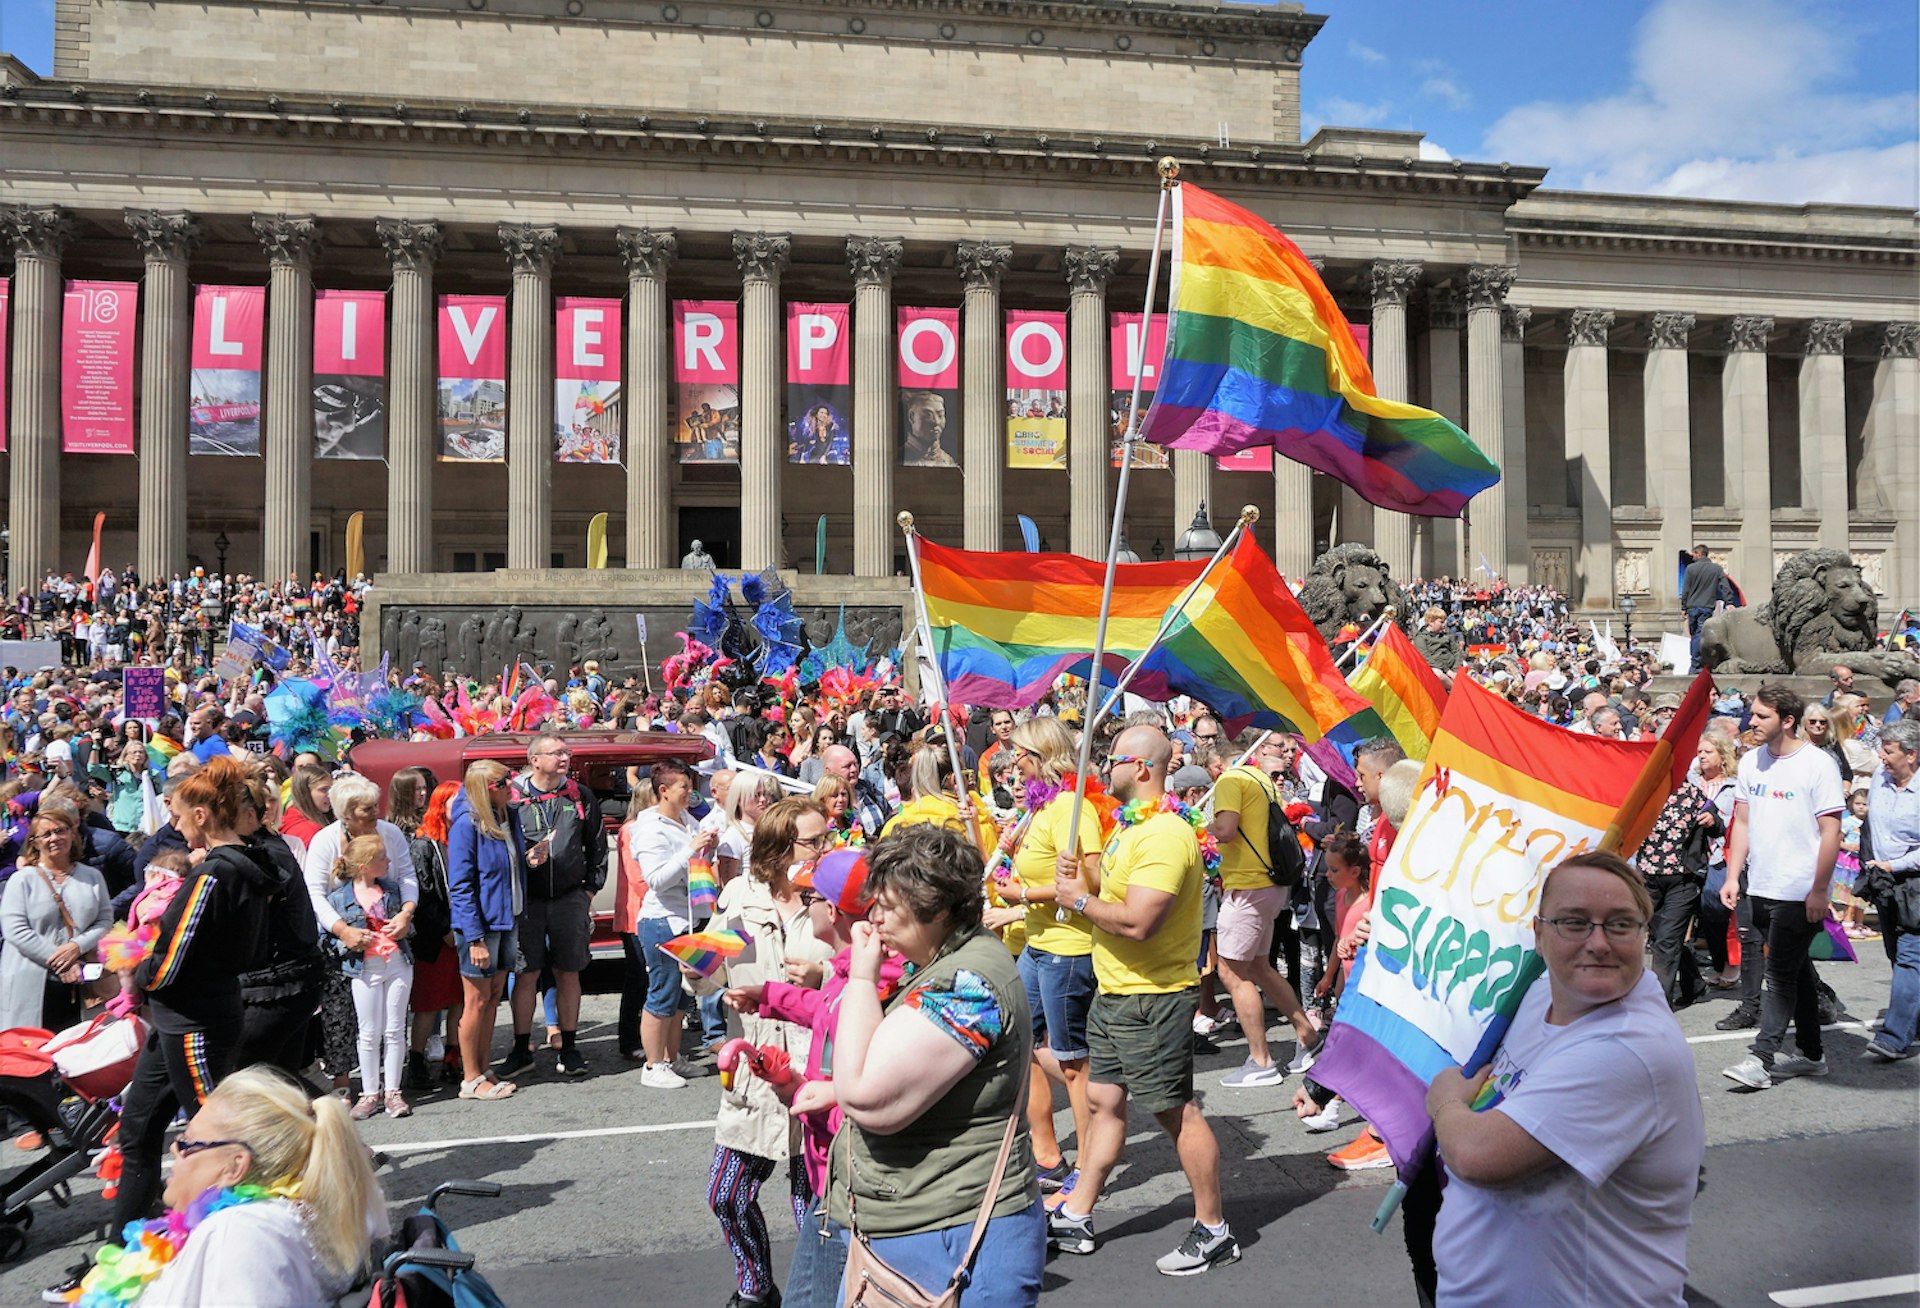 Marchers wave rainbow flags in front of St George’s Hall during the Pride parade, Liverpool, England, United Kingdom